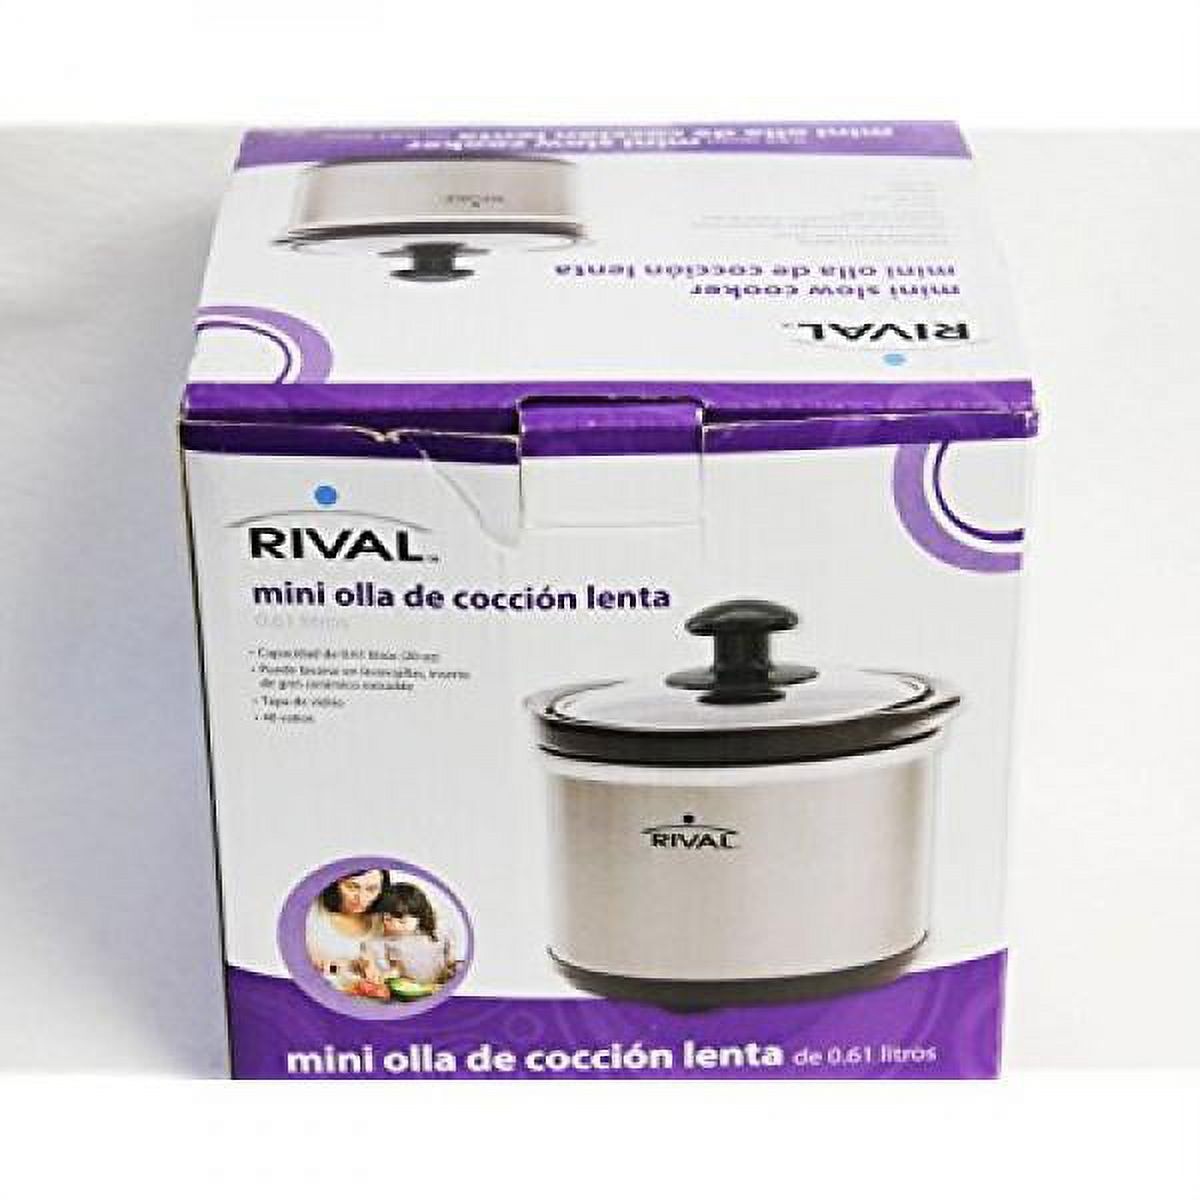 Rival .65-Quart Mini Slow Cooker, Stainless Steel - image 2 of 3